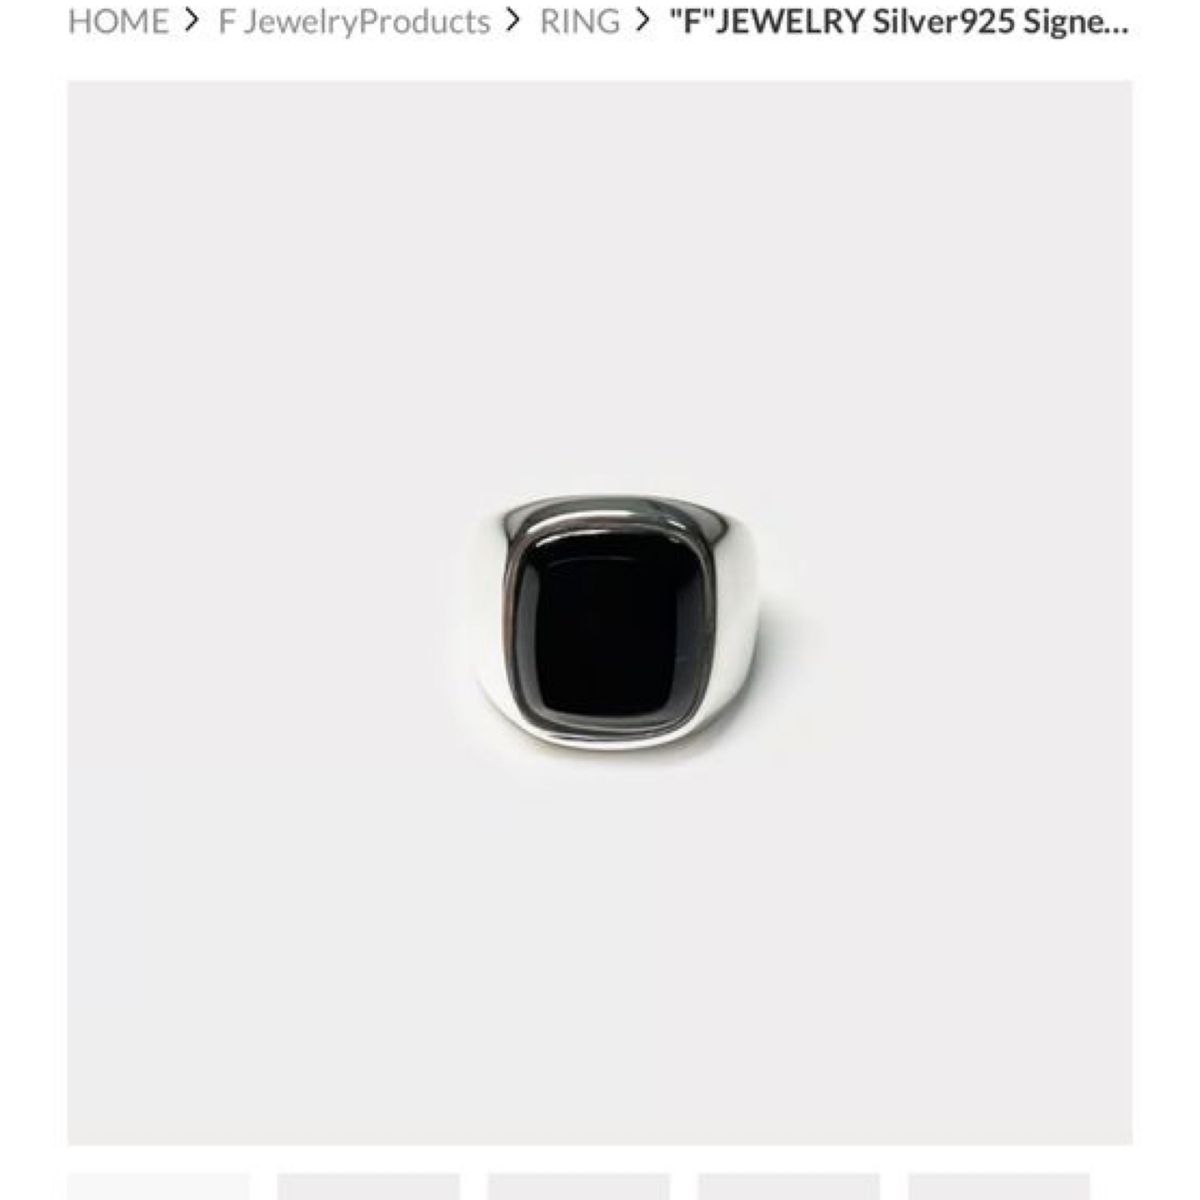 "F"JEWELRY Silver925 Signet Stone Ring -Onyx- オニキス